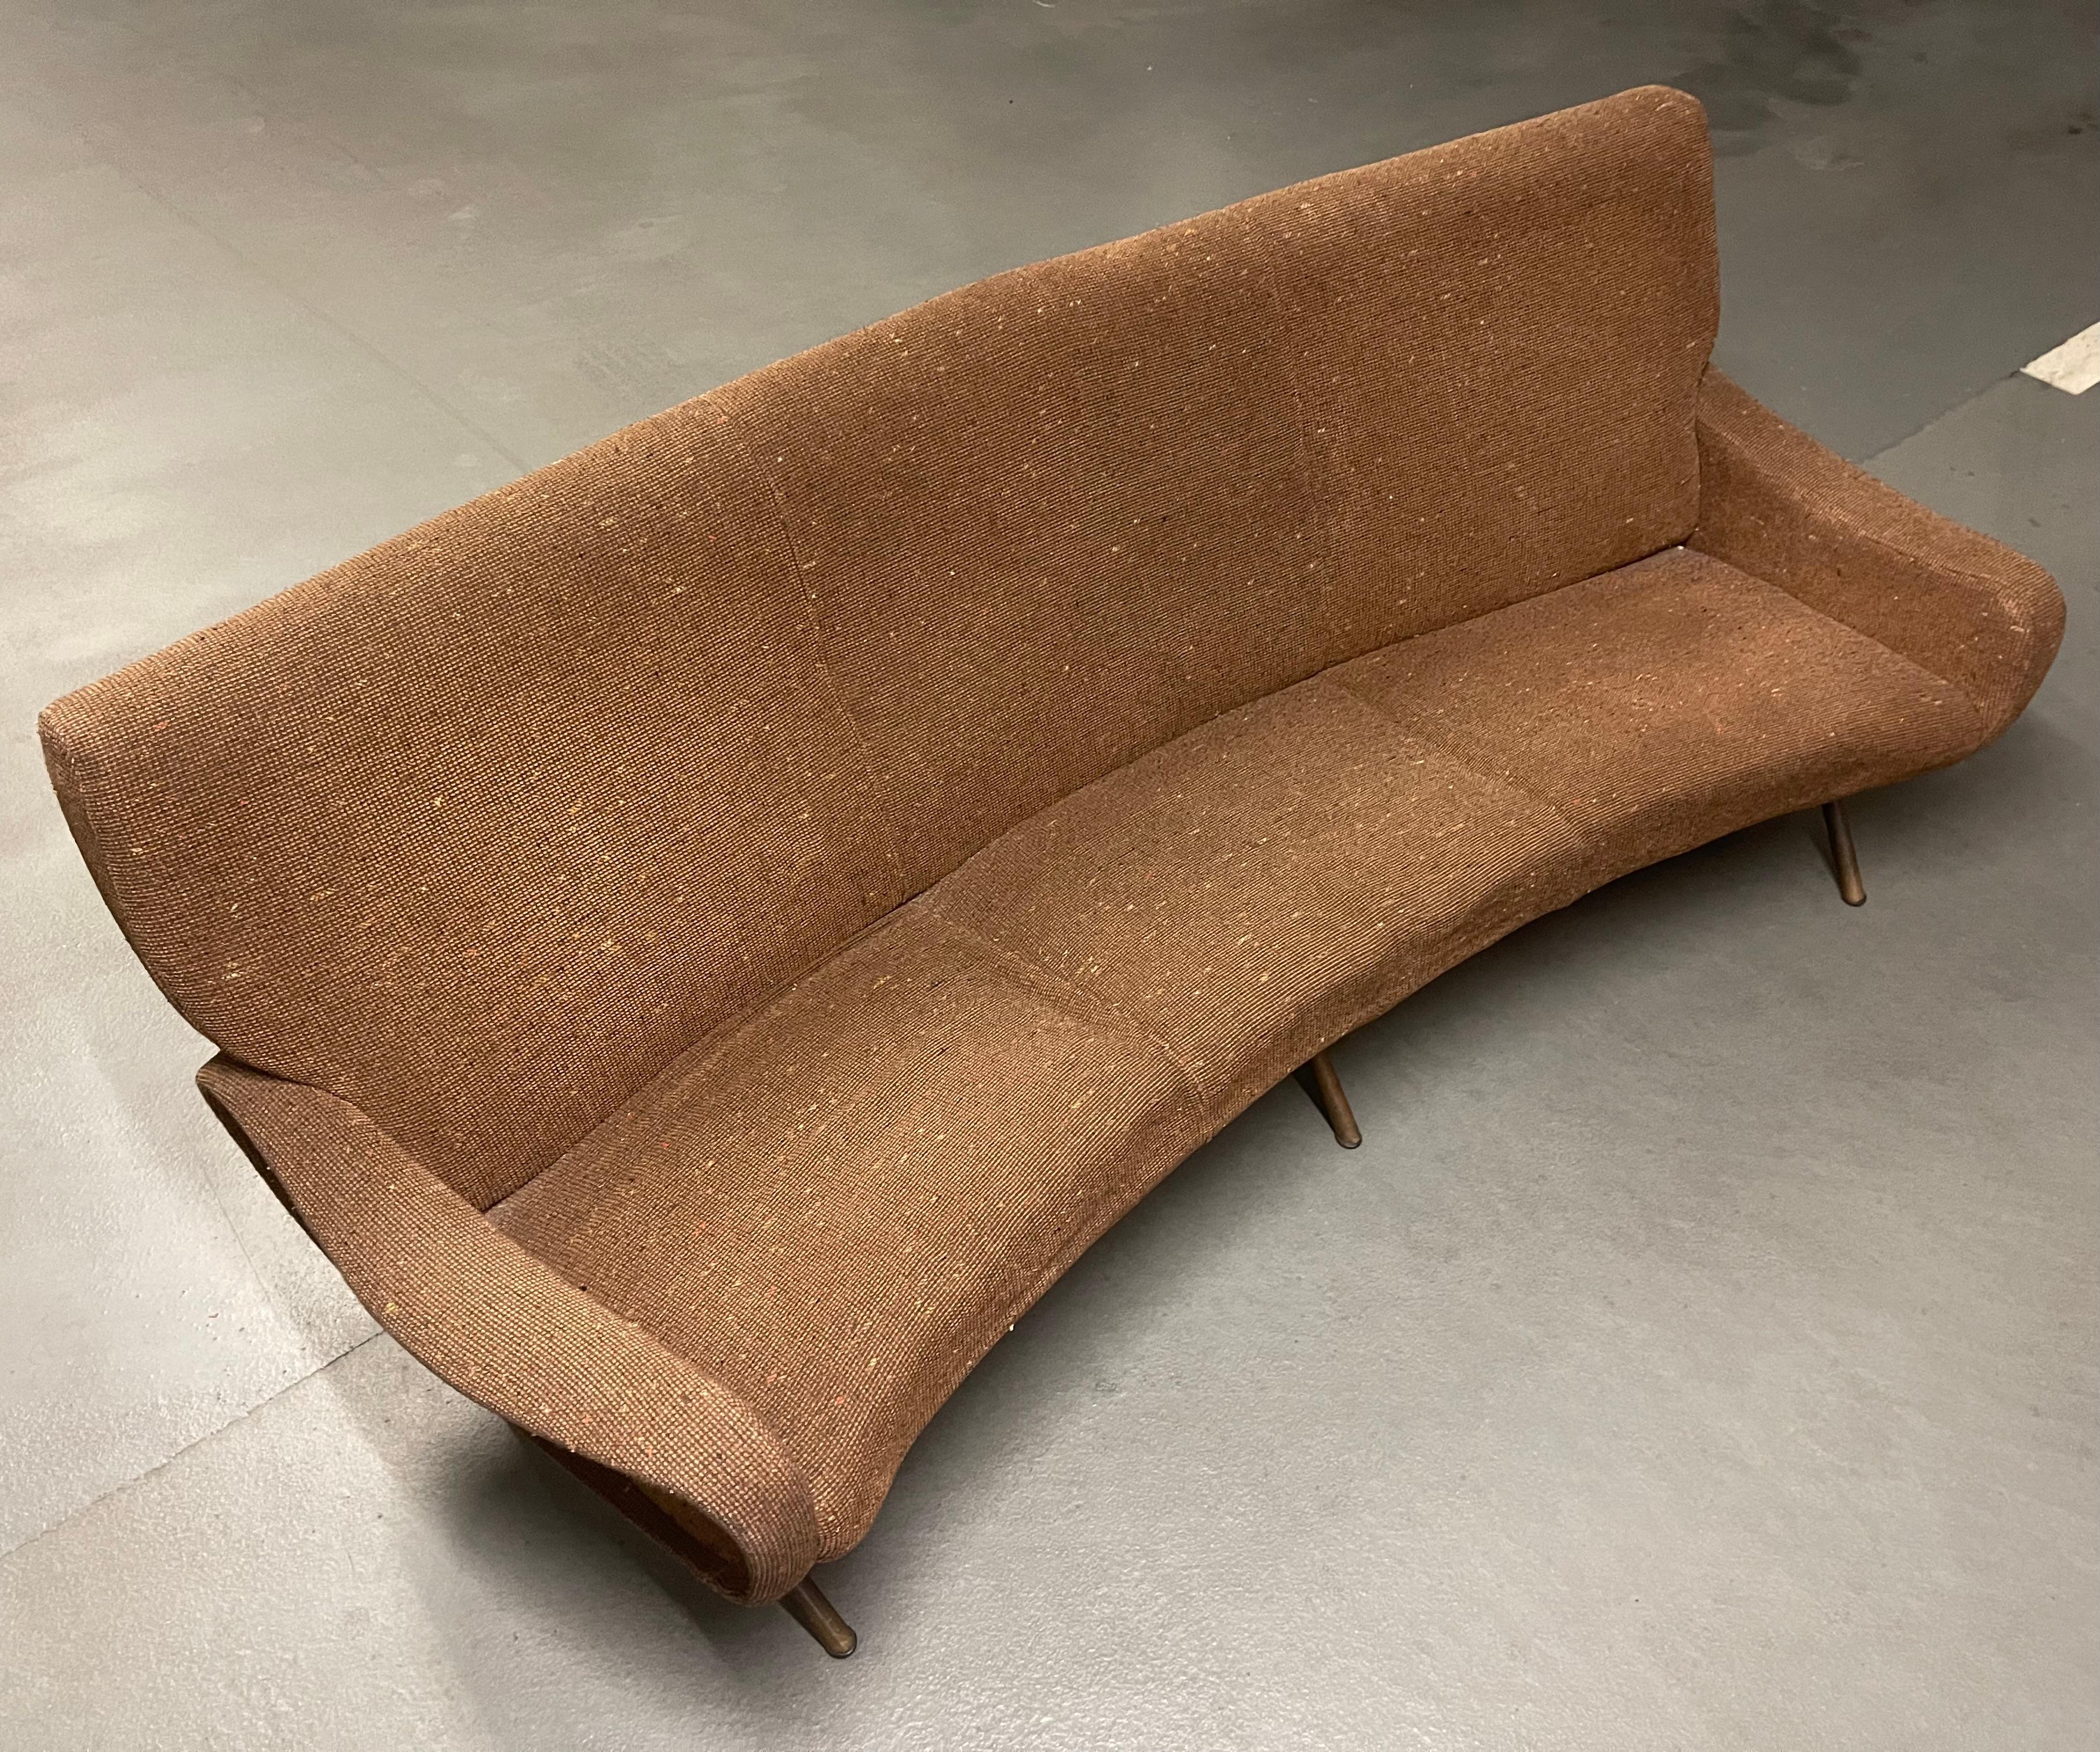 rare and elegant lady sofa by marco zanuso. only produced for a short period by arflex / italy.